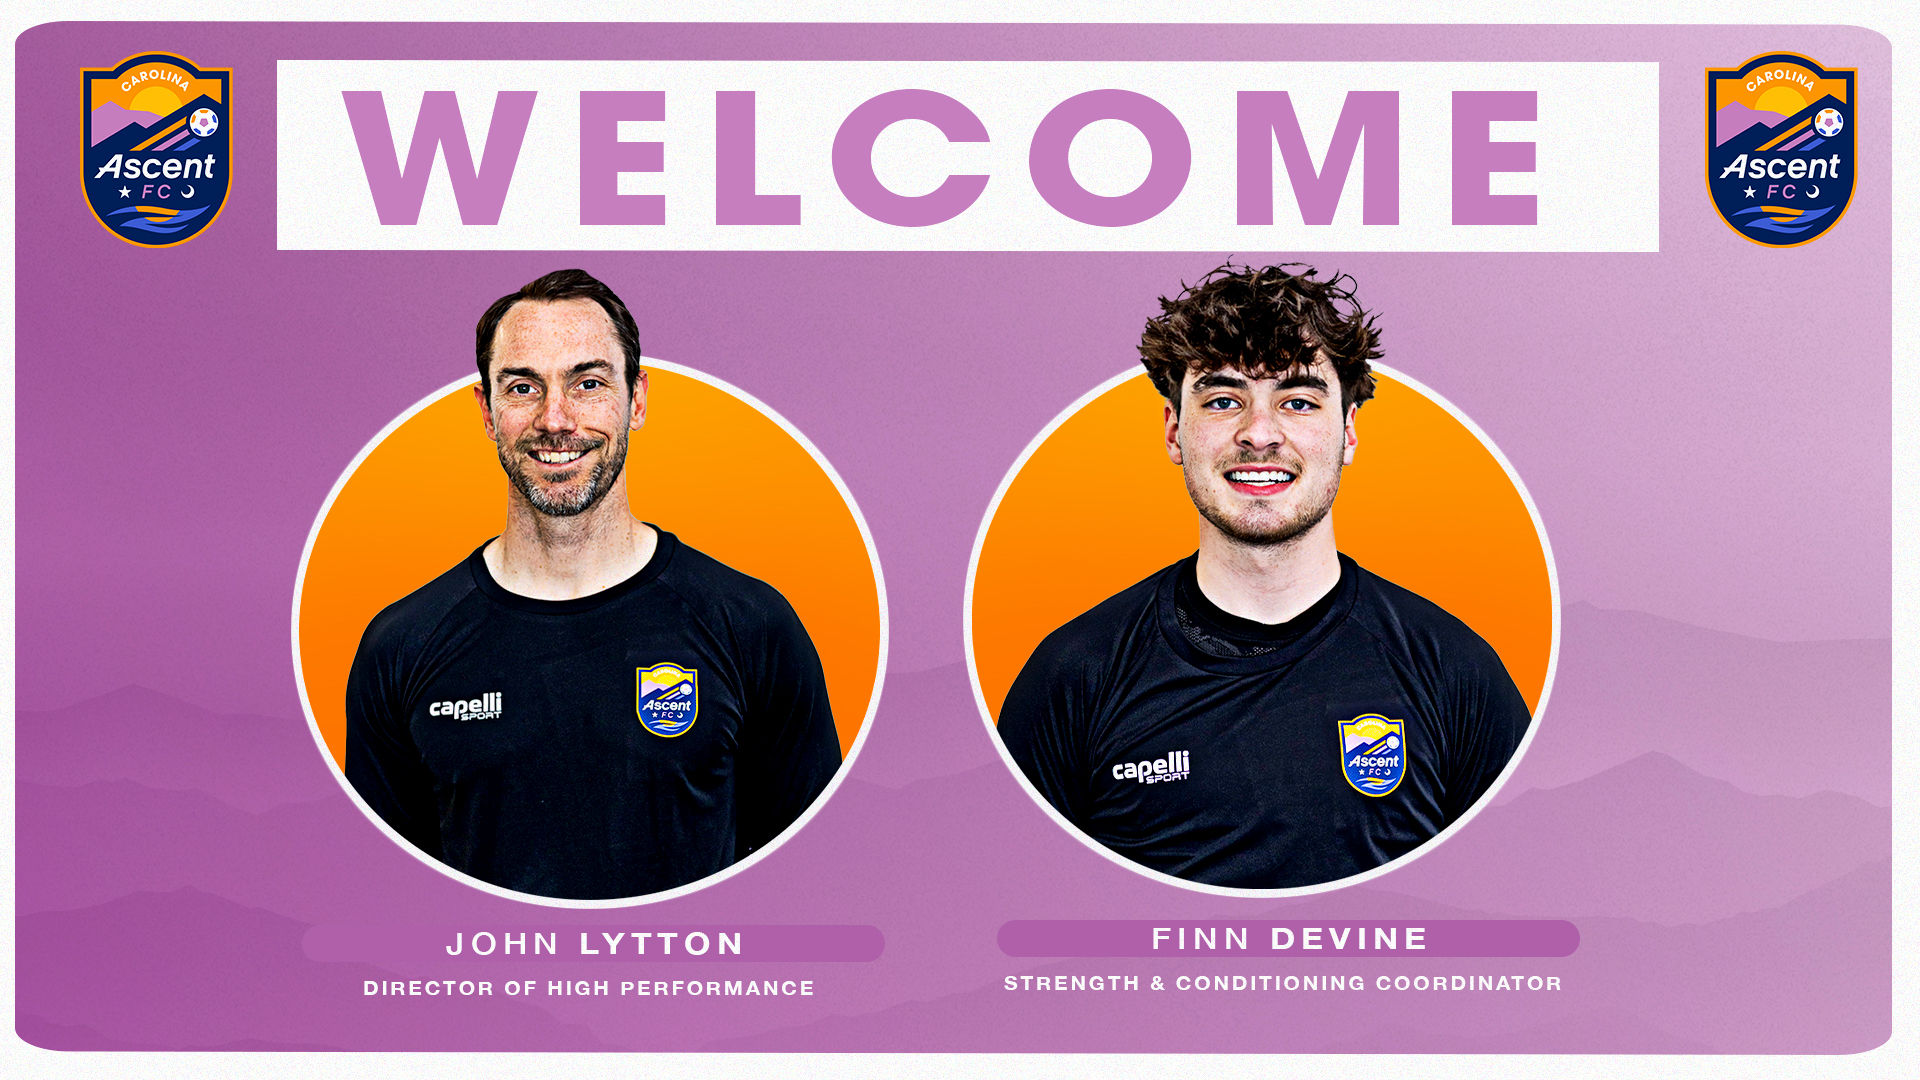 Carolina Ascent Welcome High Performance Coaches, John Lytton and Finn Devine featured image